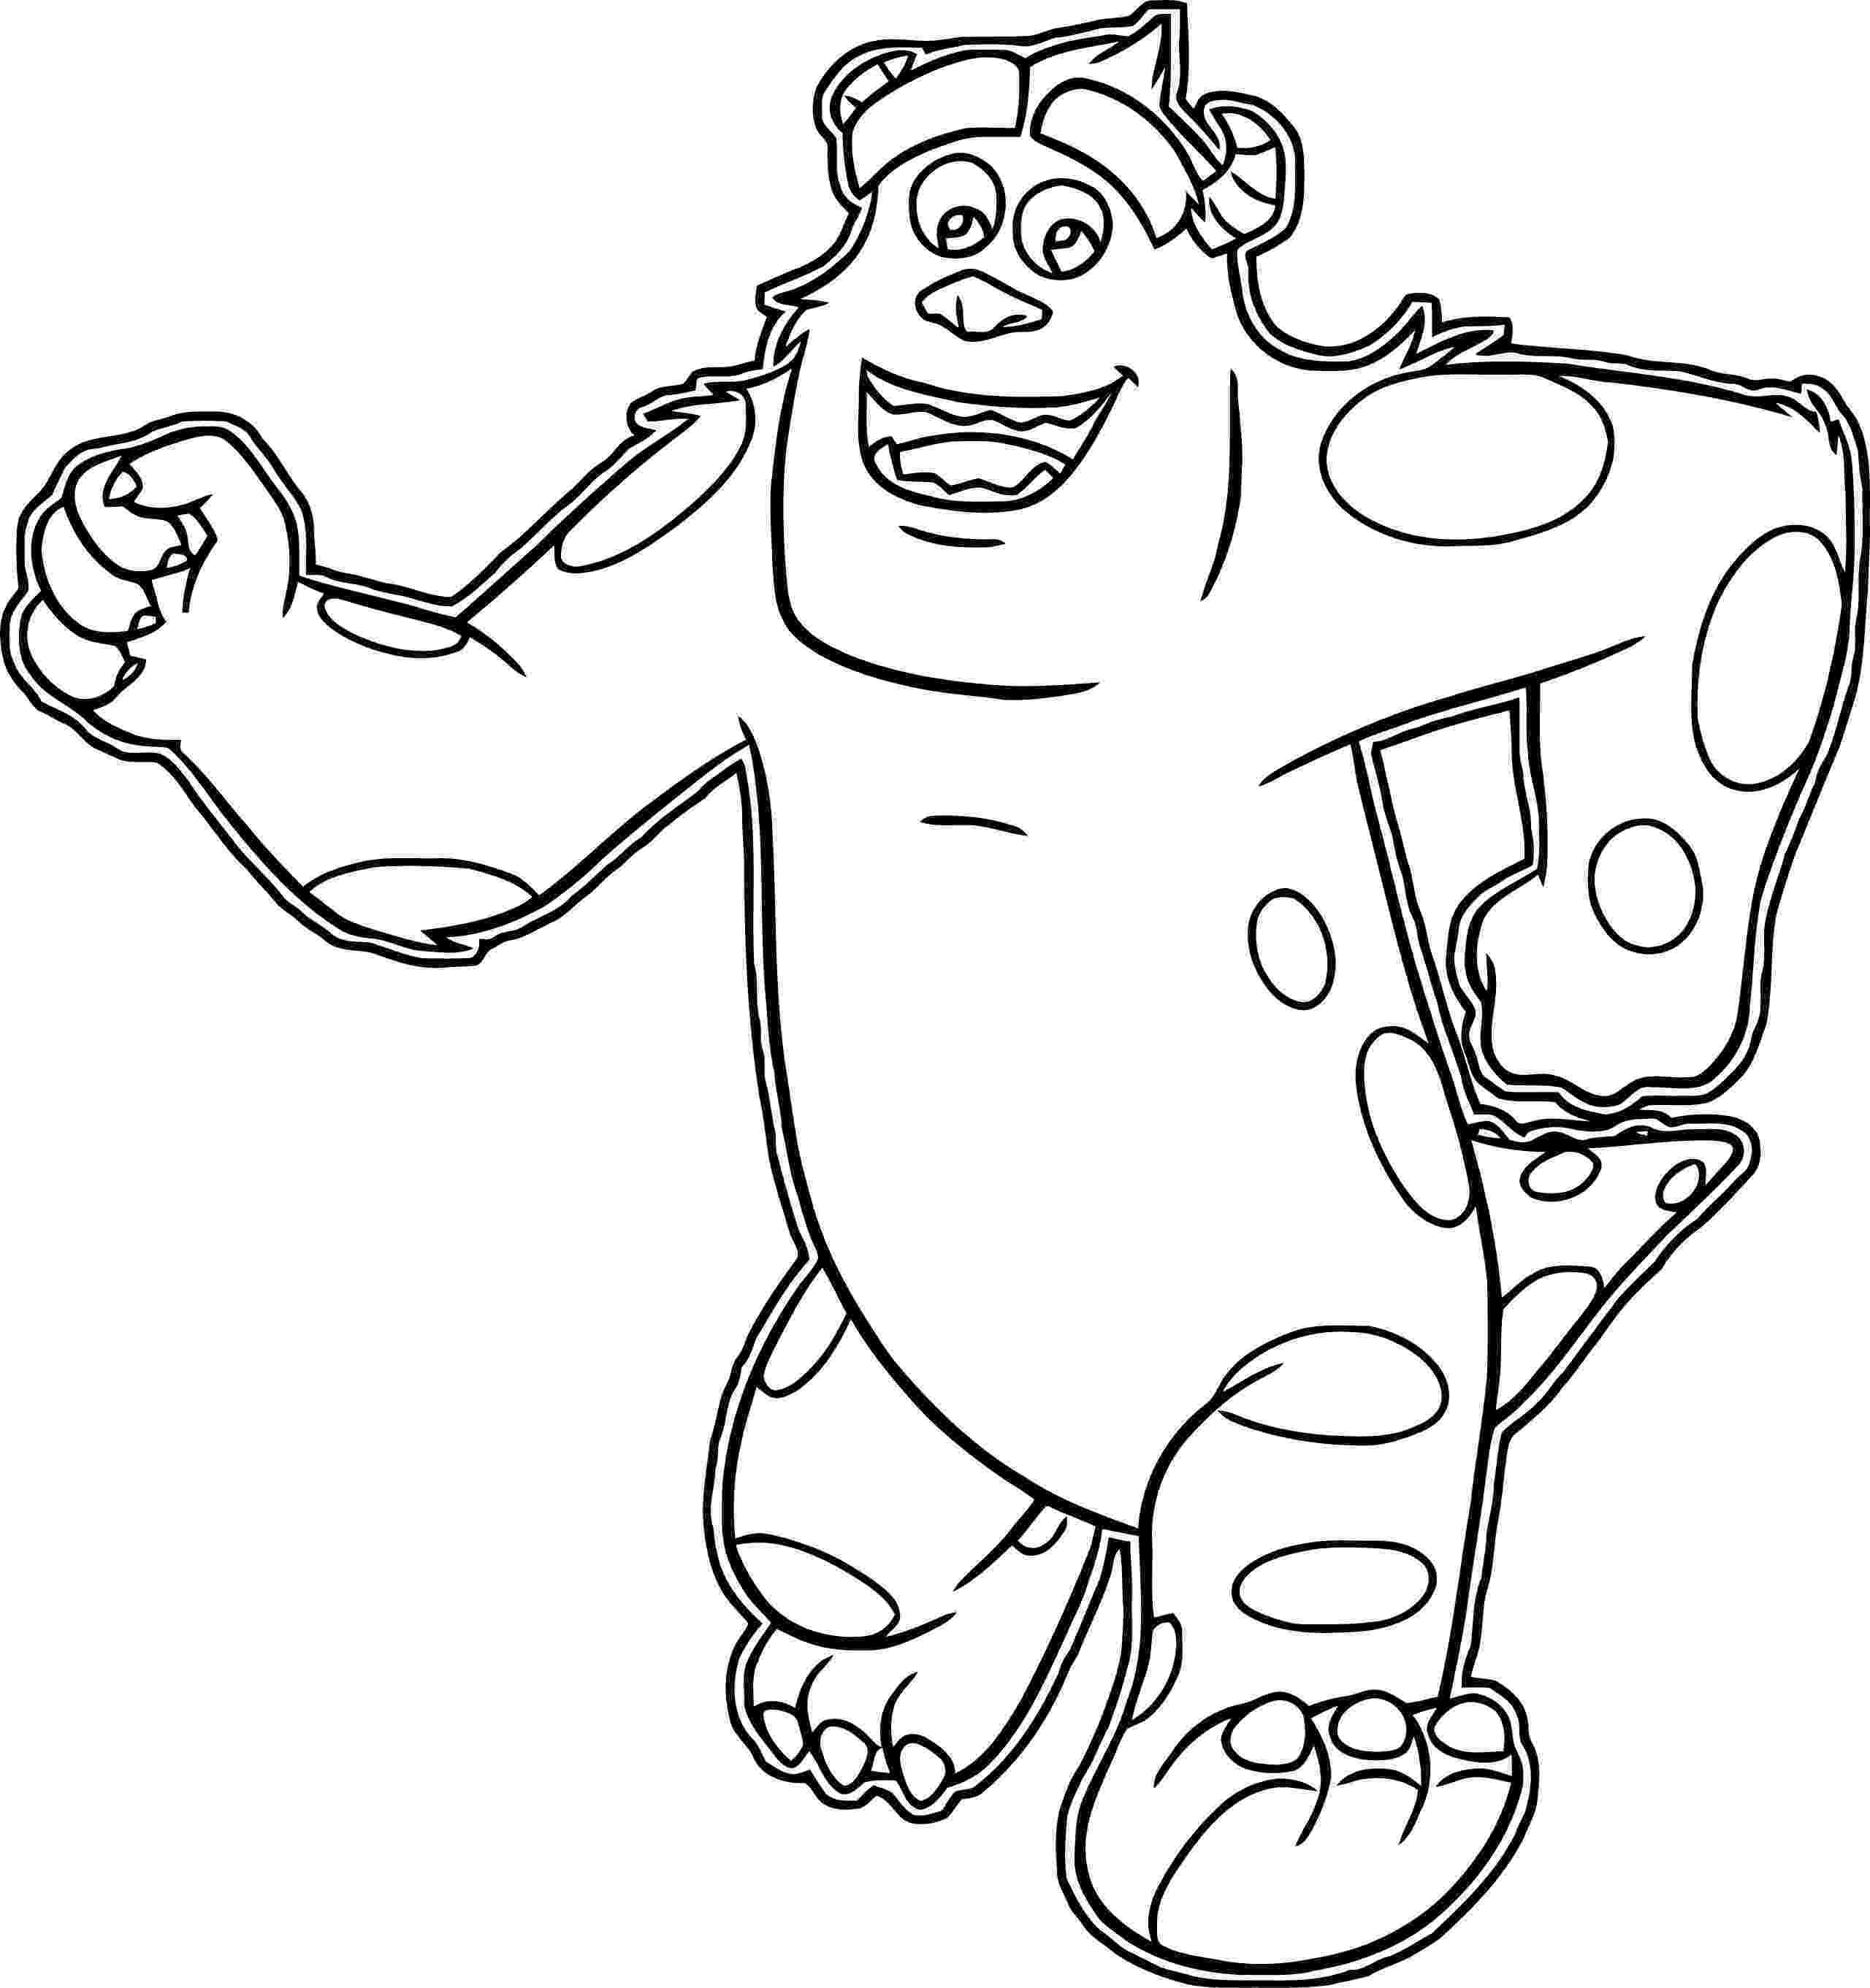 sulley coloring page drawing monsters inc 46 sulley monster inc coloring sulley coloring page 